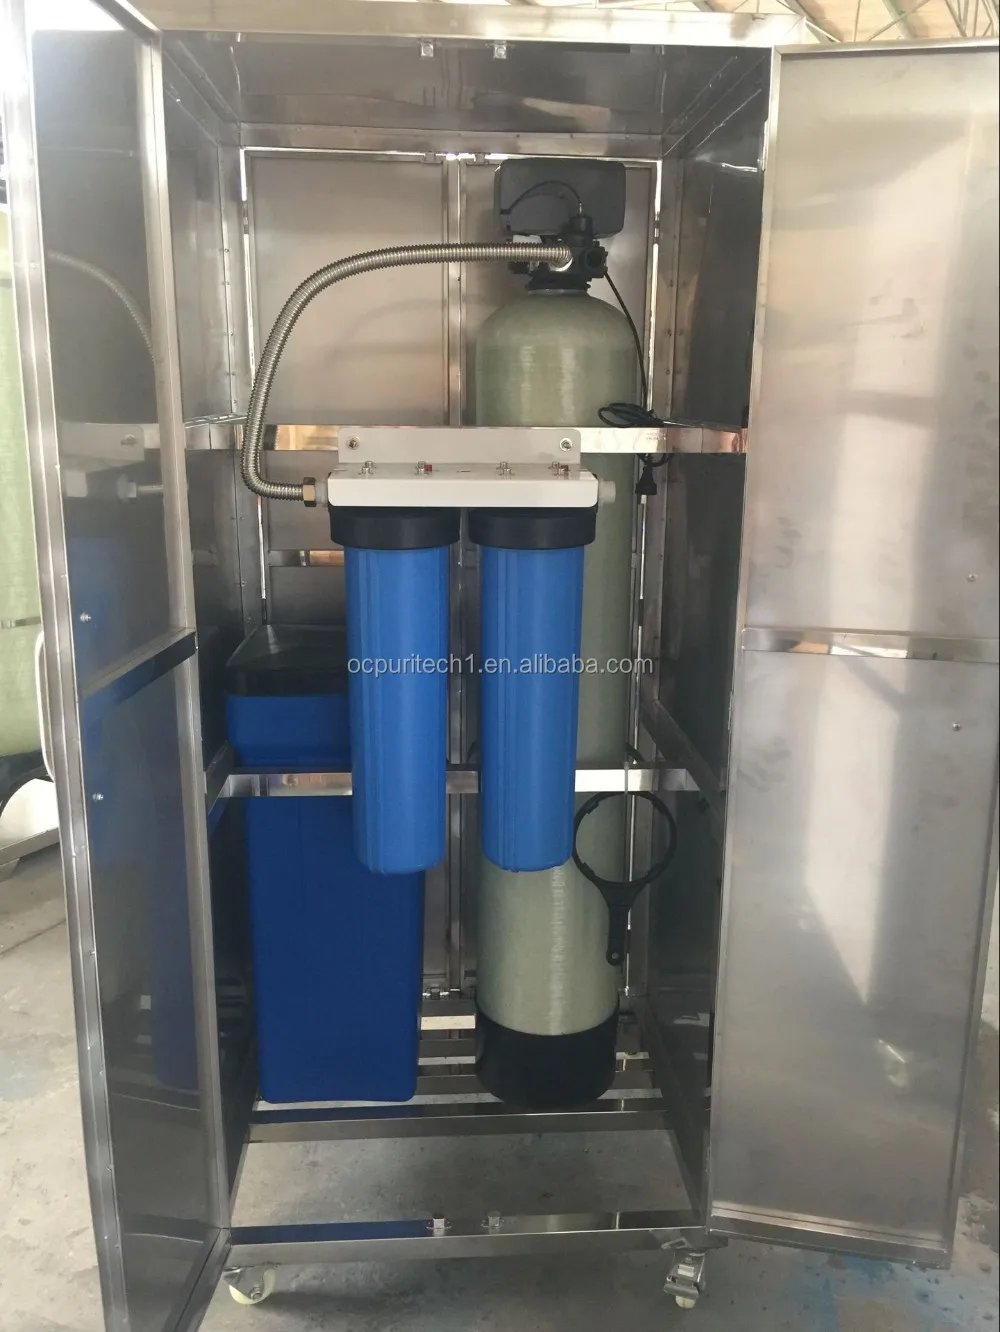 150PSI frp tank automatic water softener for removing hardness from water